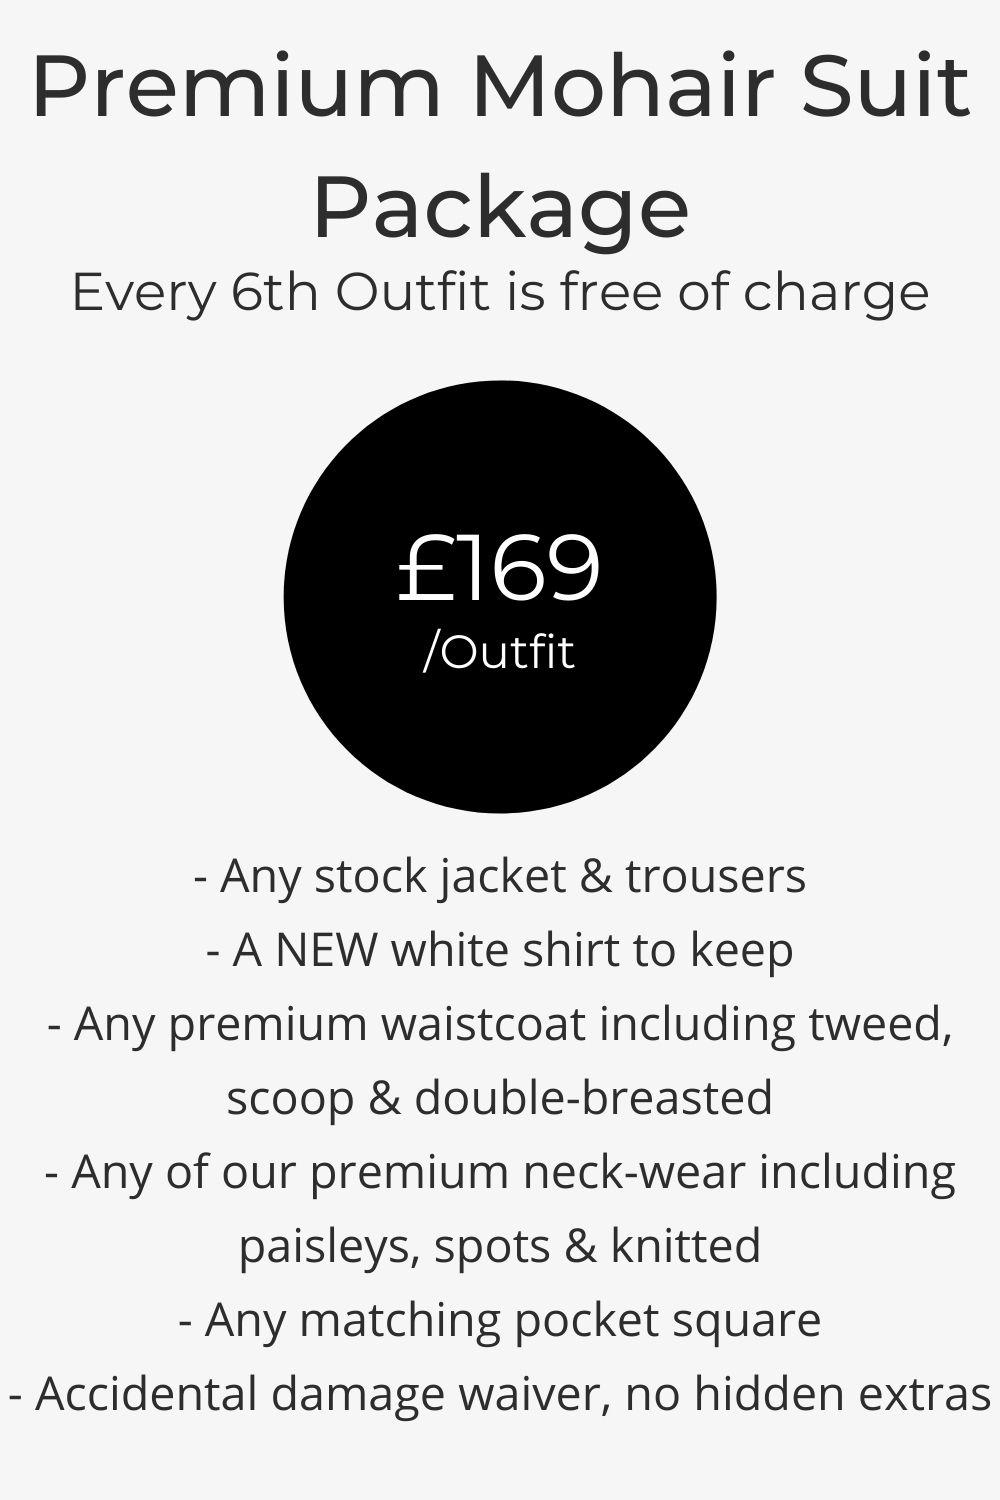 Wedding Lounge Suit Hire Pricing List